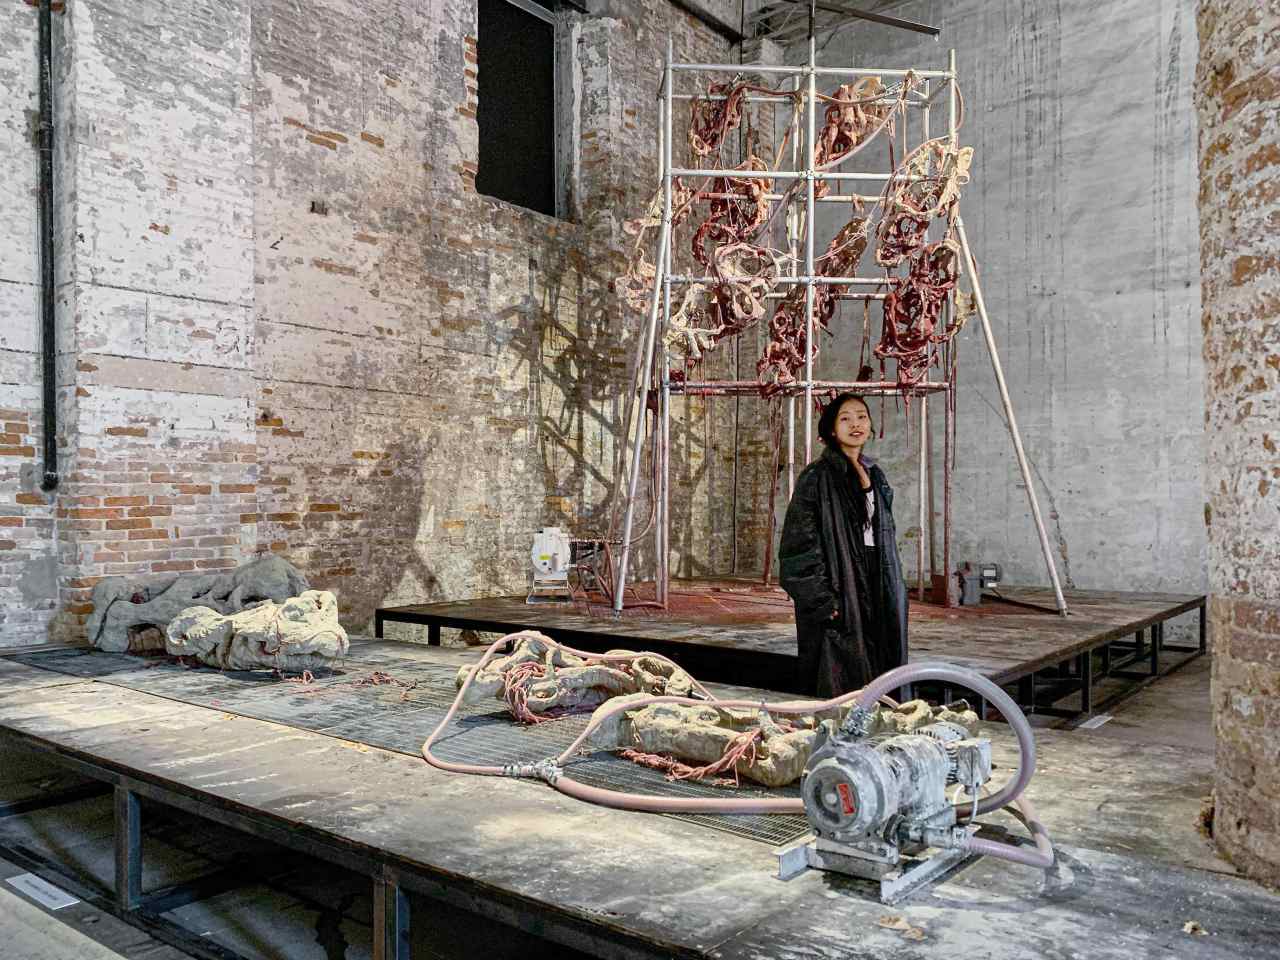 Lee Mi-re stands in front of her work, “Endless House: Holes and Drips,” at the Arsenale, the main exhibition venue of the Venice Biennale 2022. (Tina Kim Gallery)